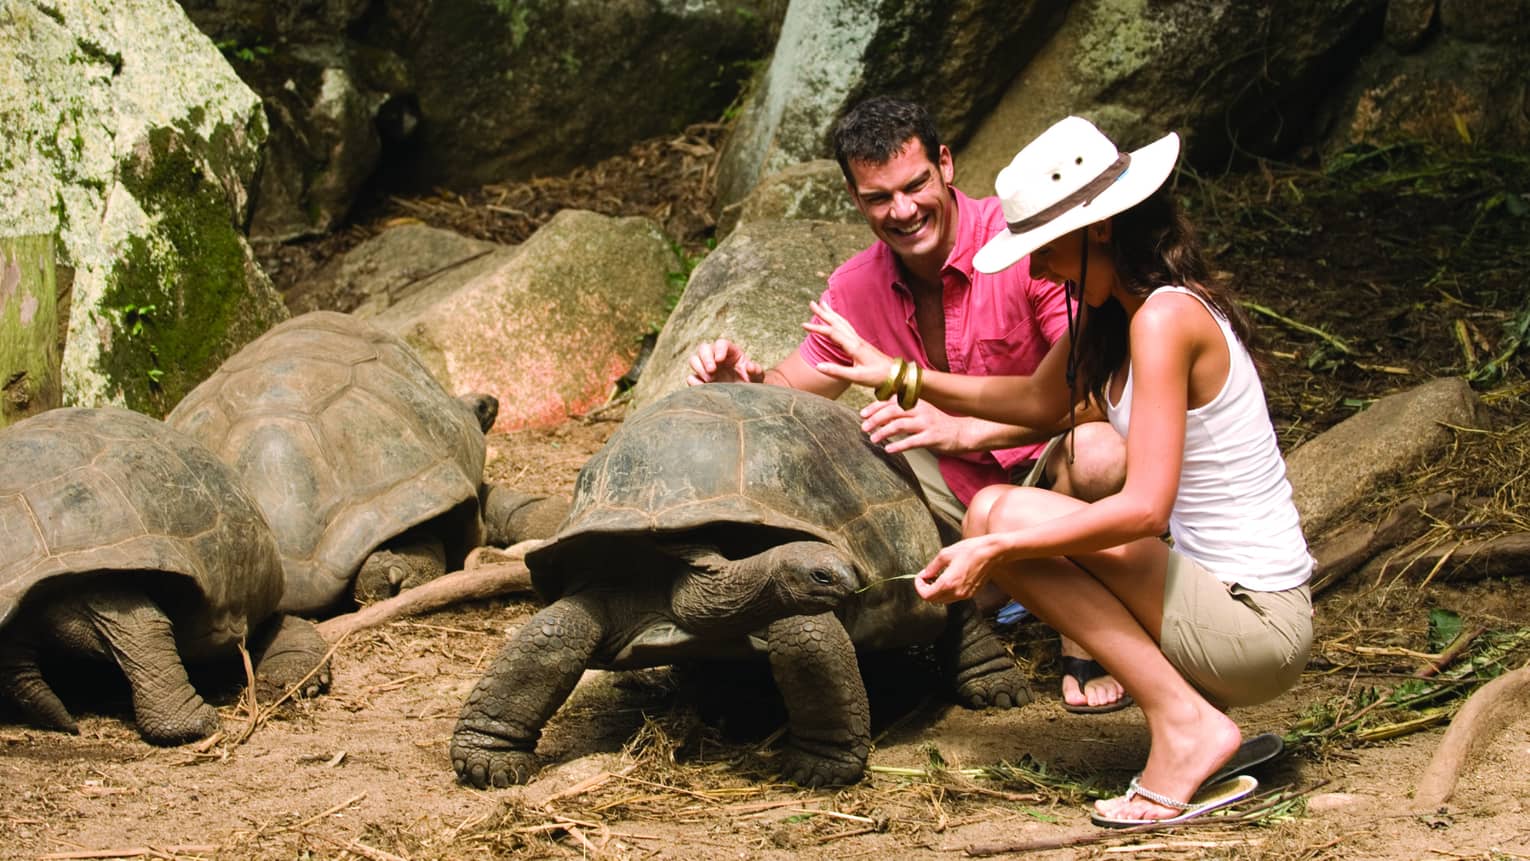 Man in pink button-up shirt and woman in white sunhat laugh, kneel above two Aldabra giant tortoises